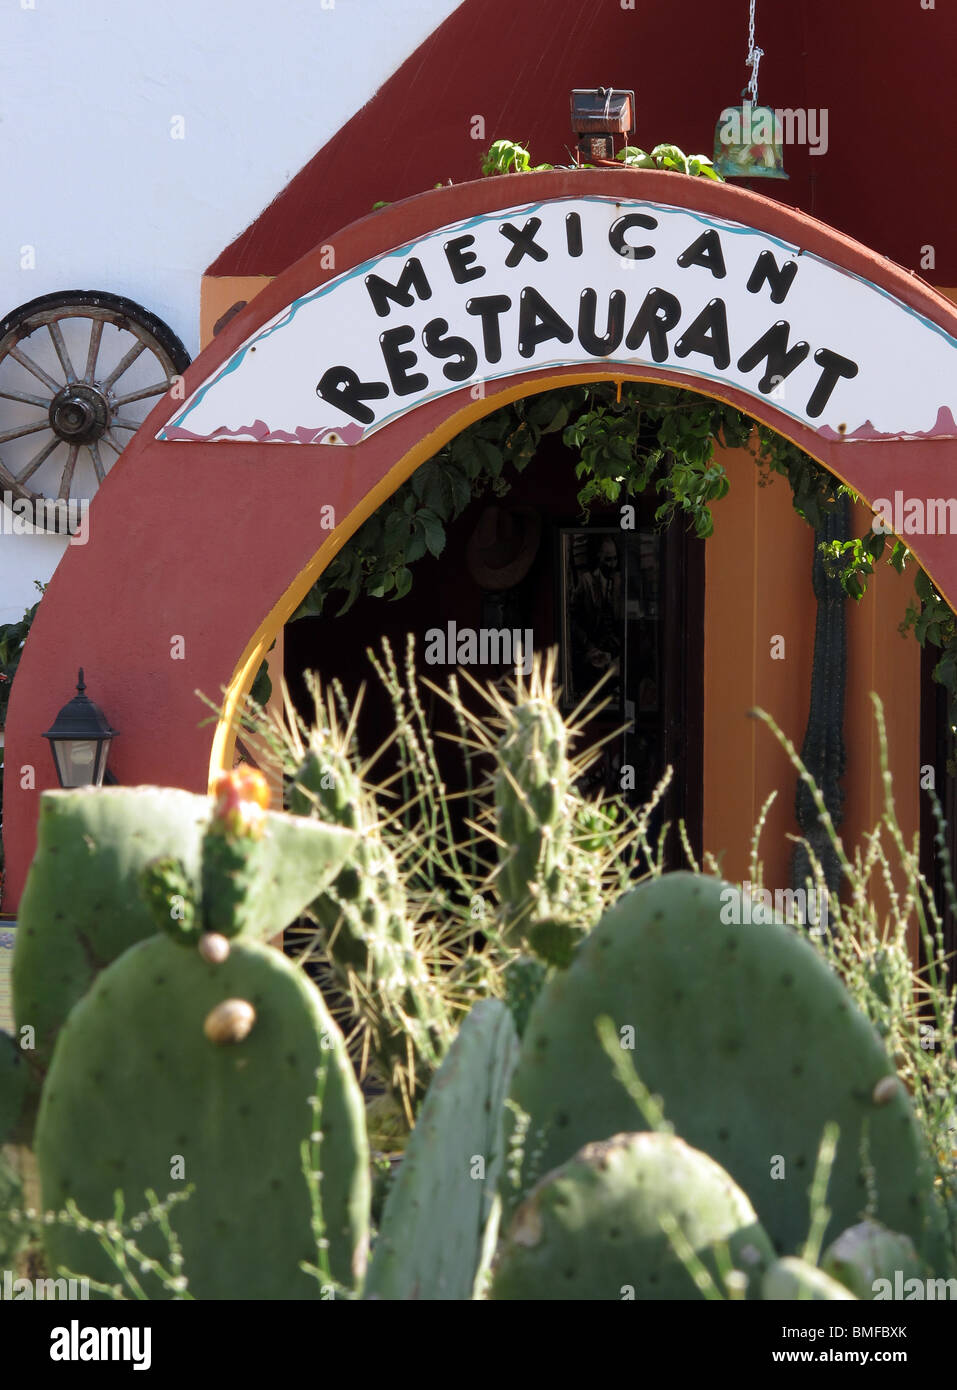 detail photograph from Mexican restaurant Stock Photo